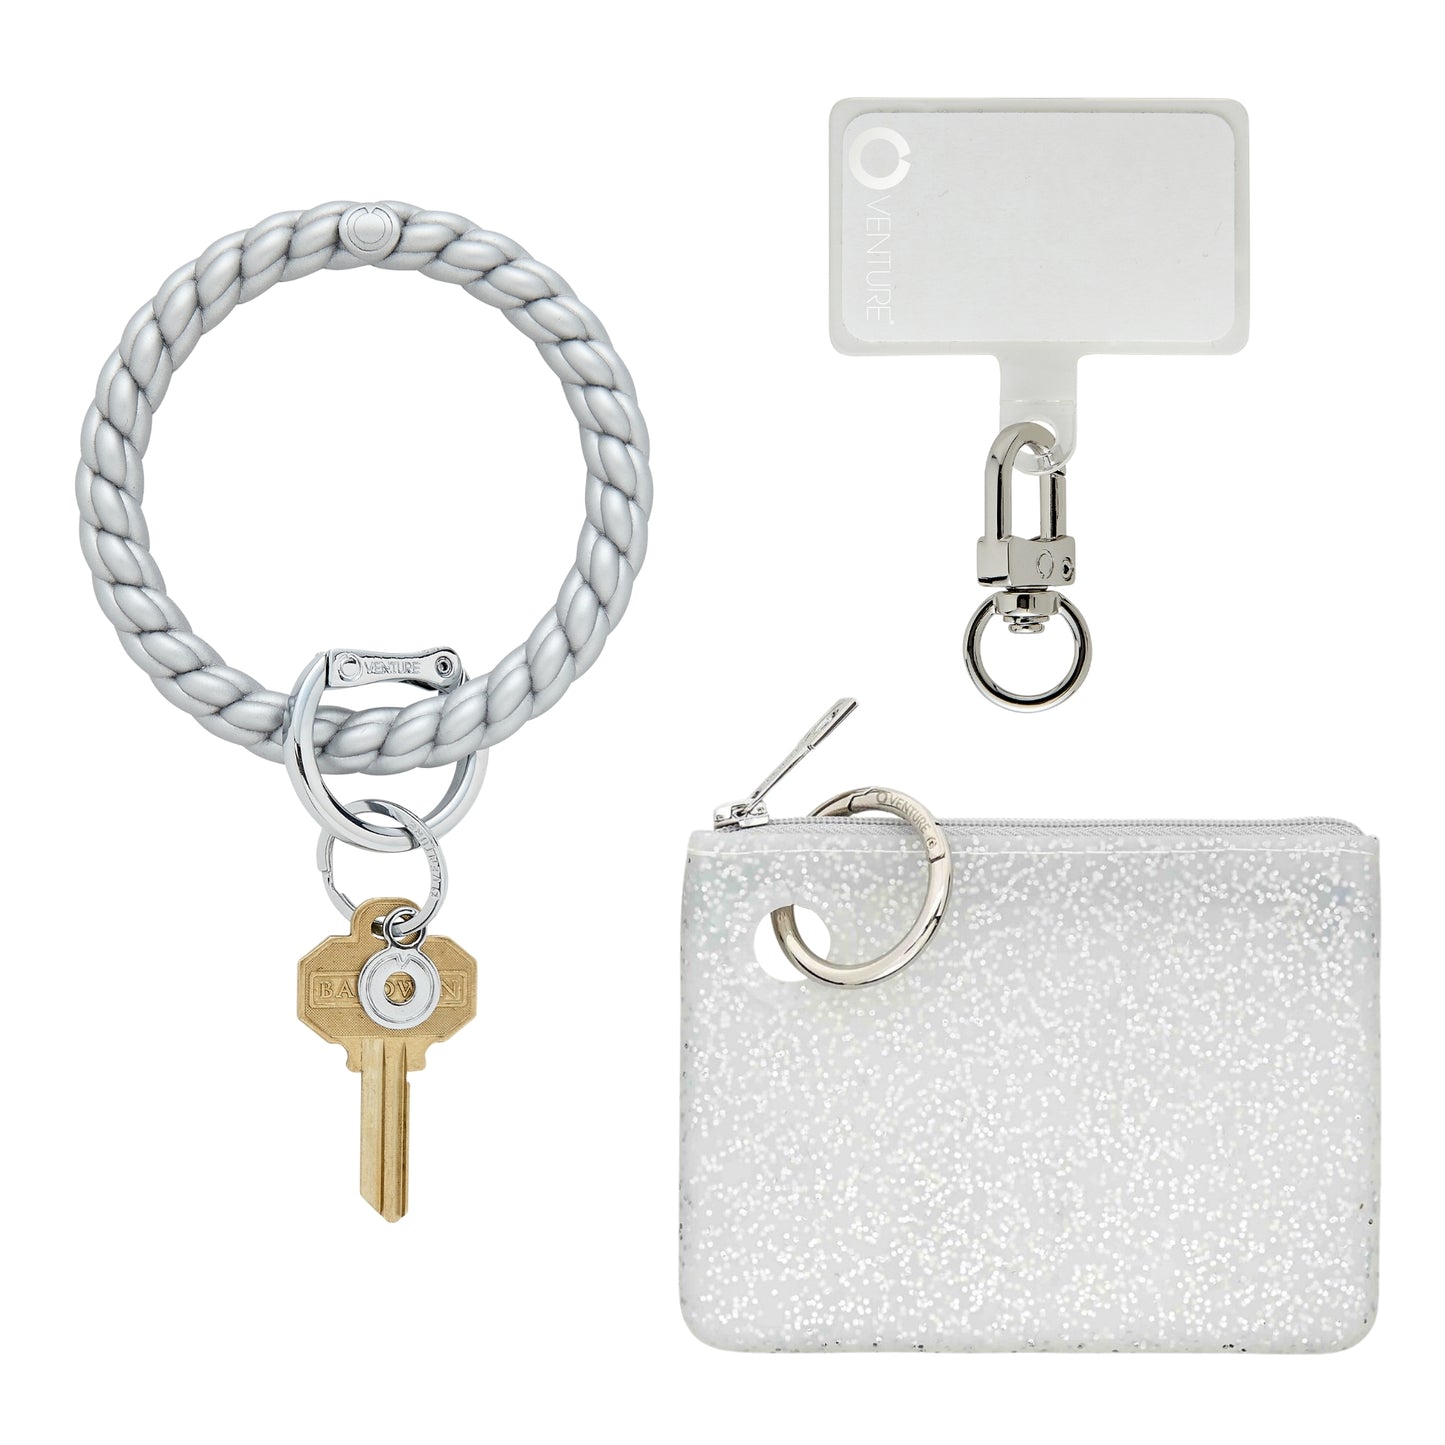 Braided silicone Three in one set with Big O Keyring in silver braid, phone connector and mini silicone pouch in silver confetti